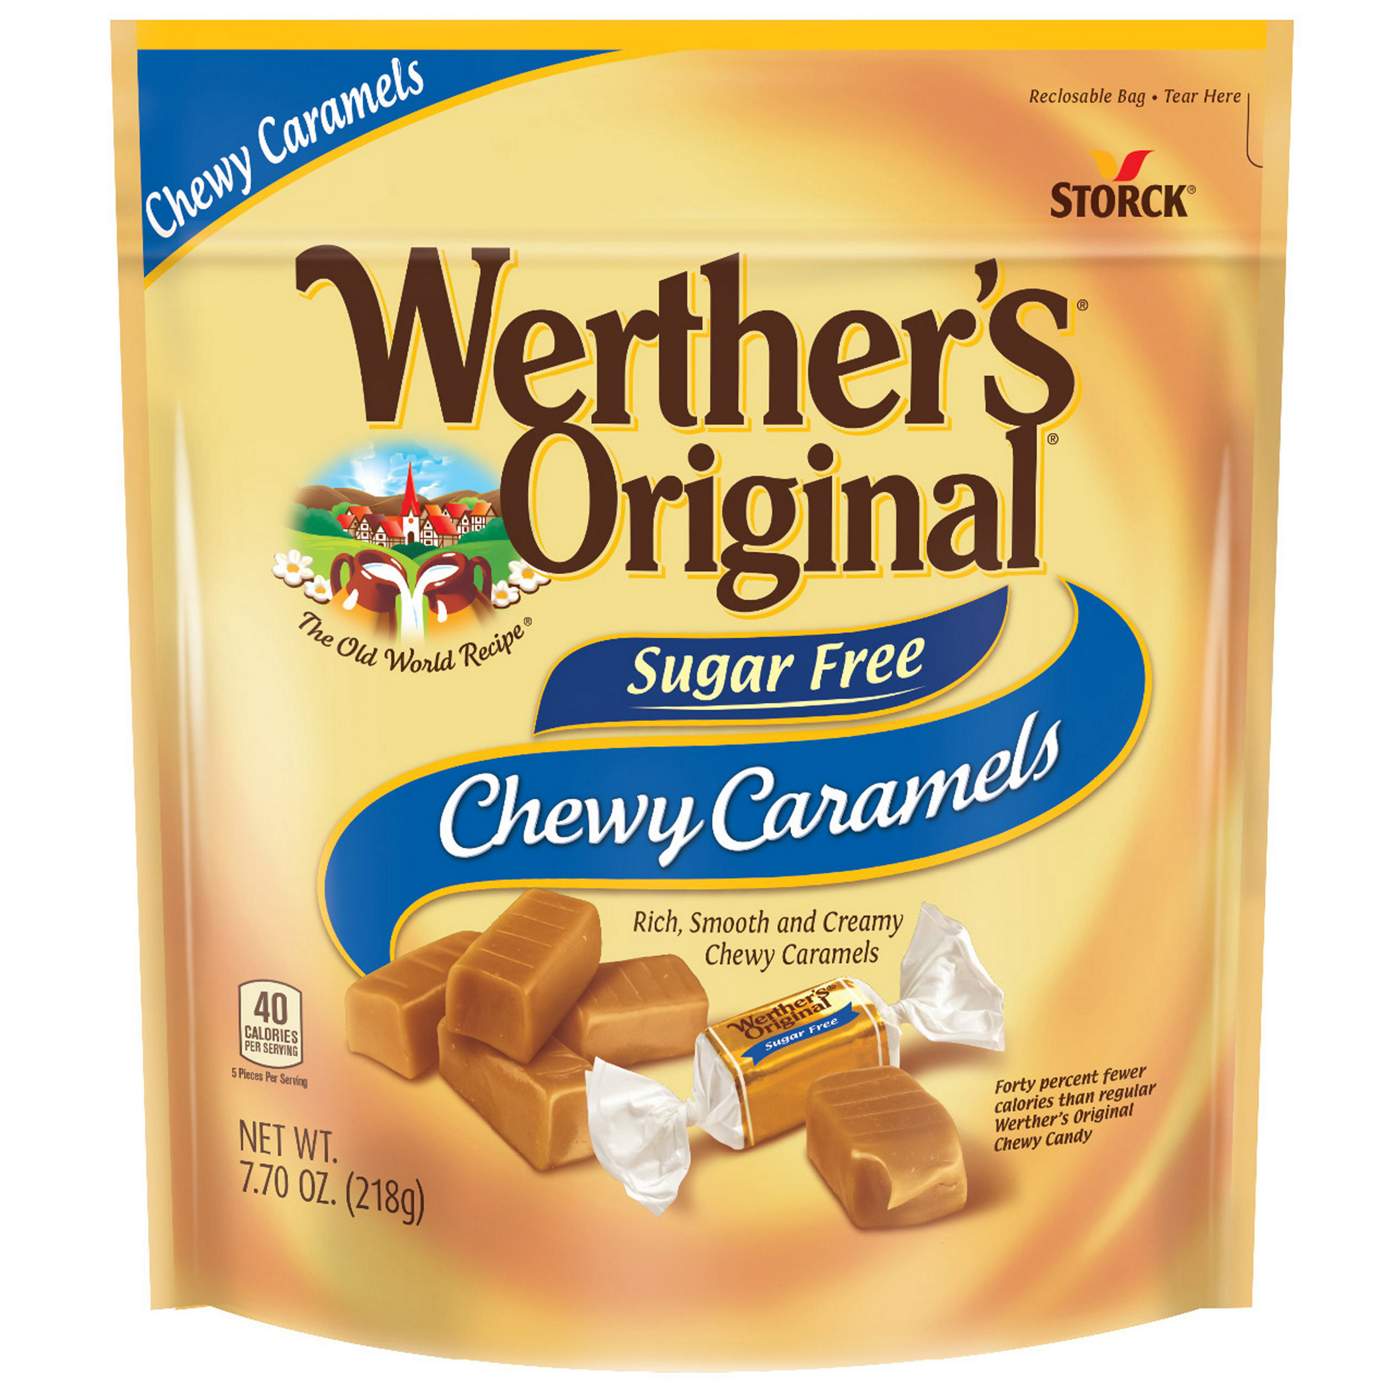 Werther's Original Sugar Free Chewy Caramels; image 1 of 6